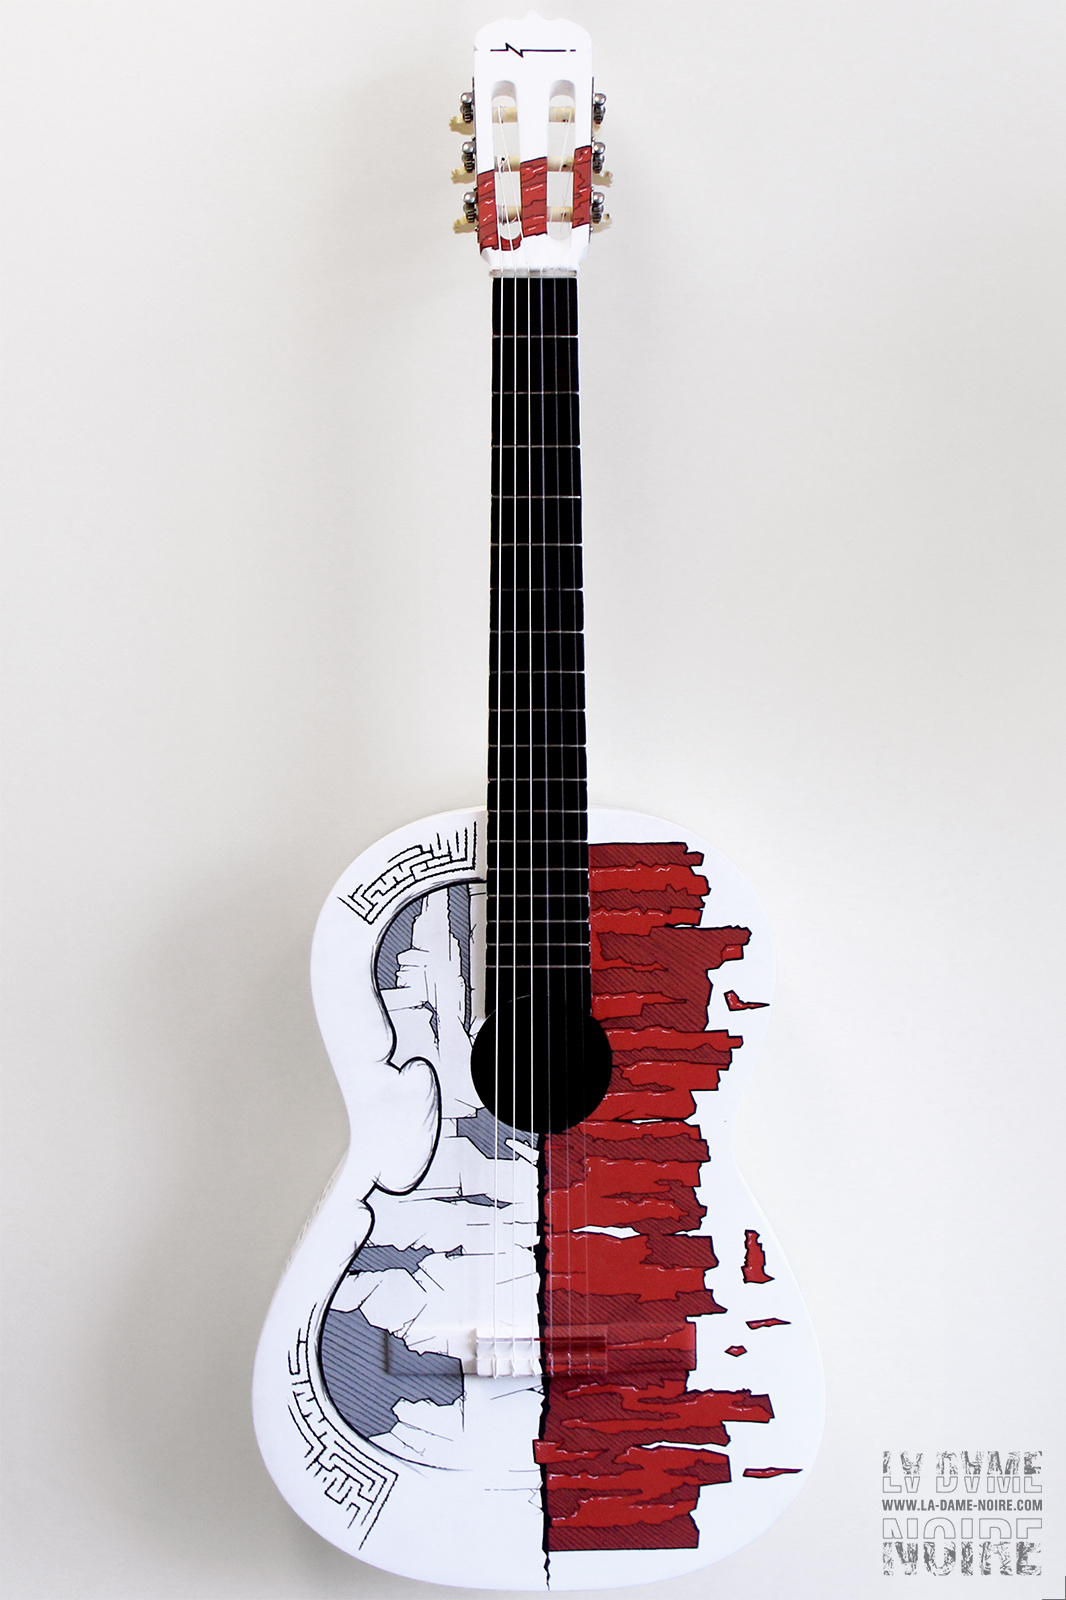 Front side of an acoustic guitar painted in white with the shape of a violin drawed on it